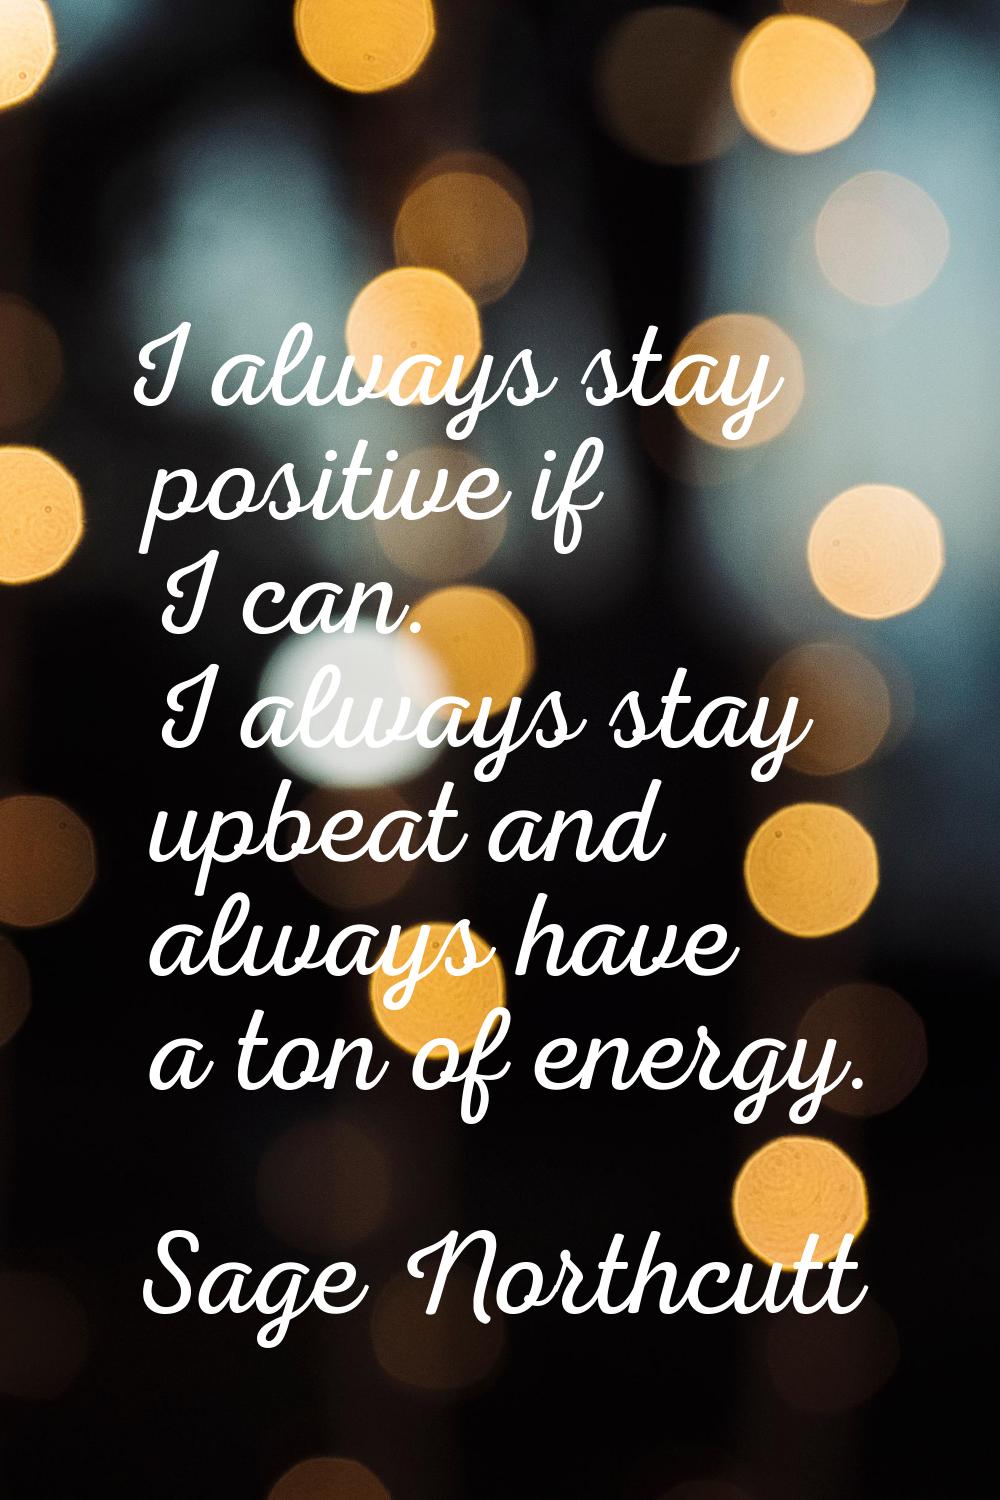 I always stay positive if I can. I always stay upbeat and always have a ton of energy.